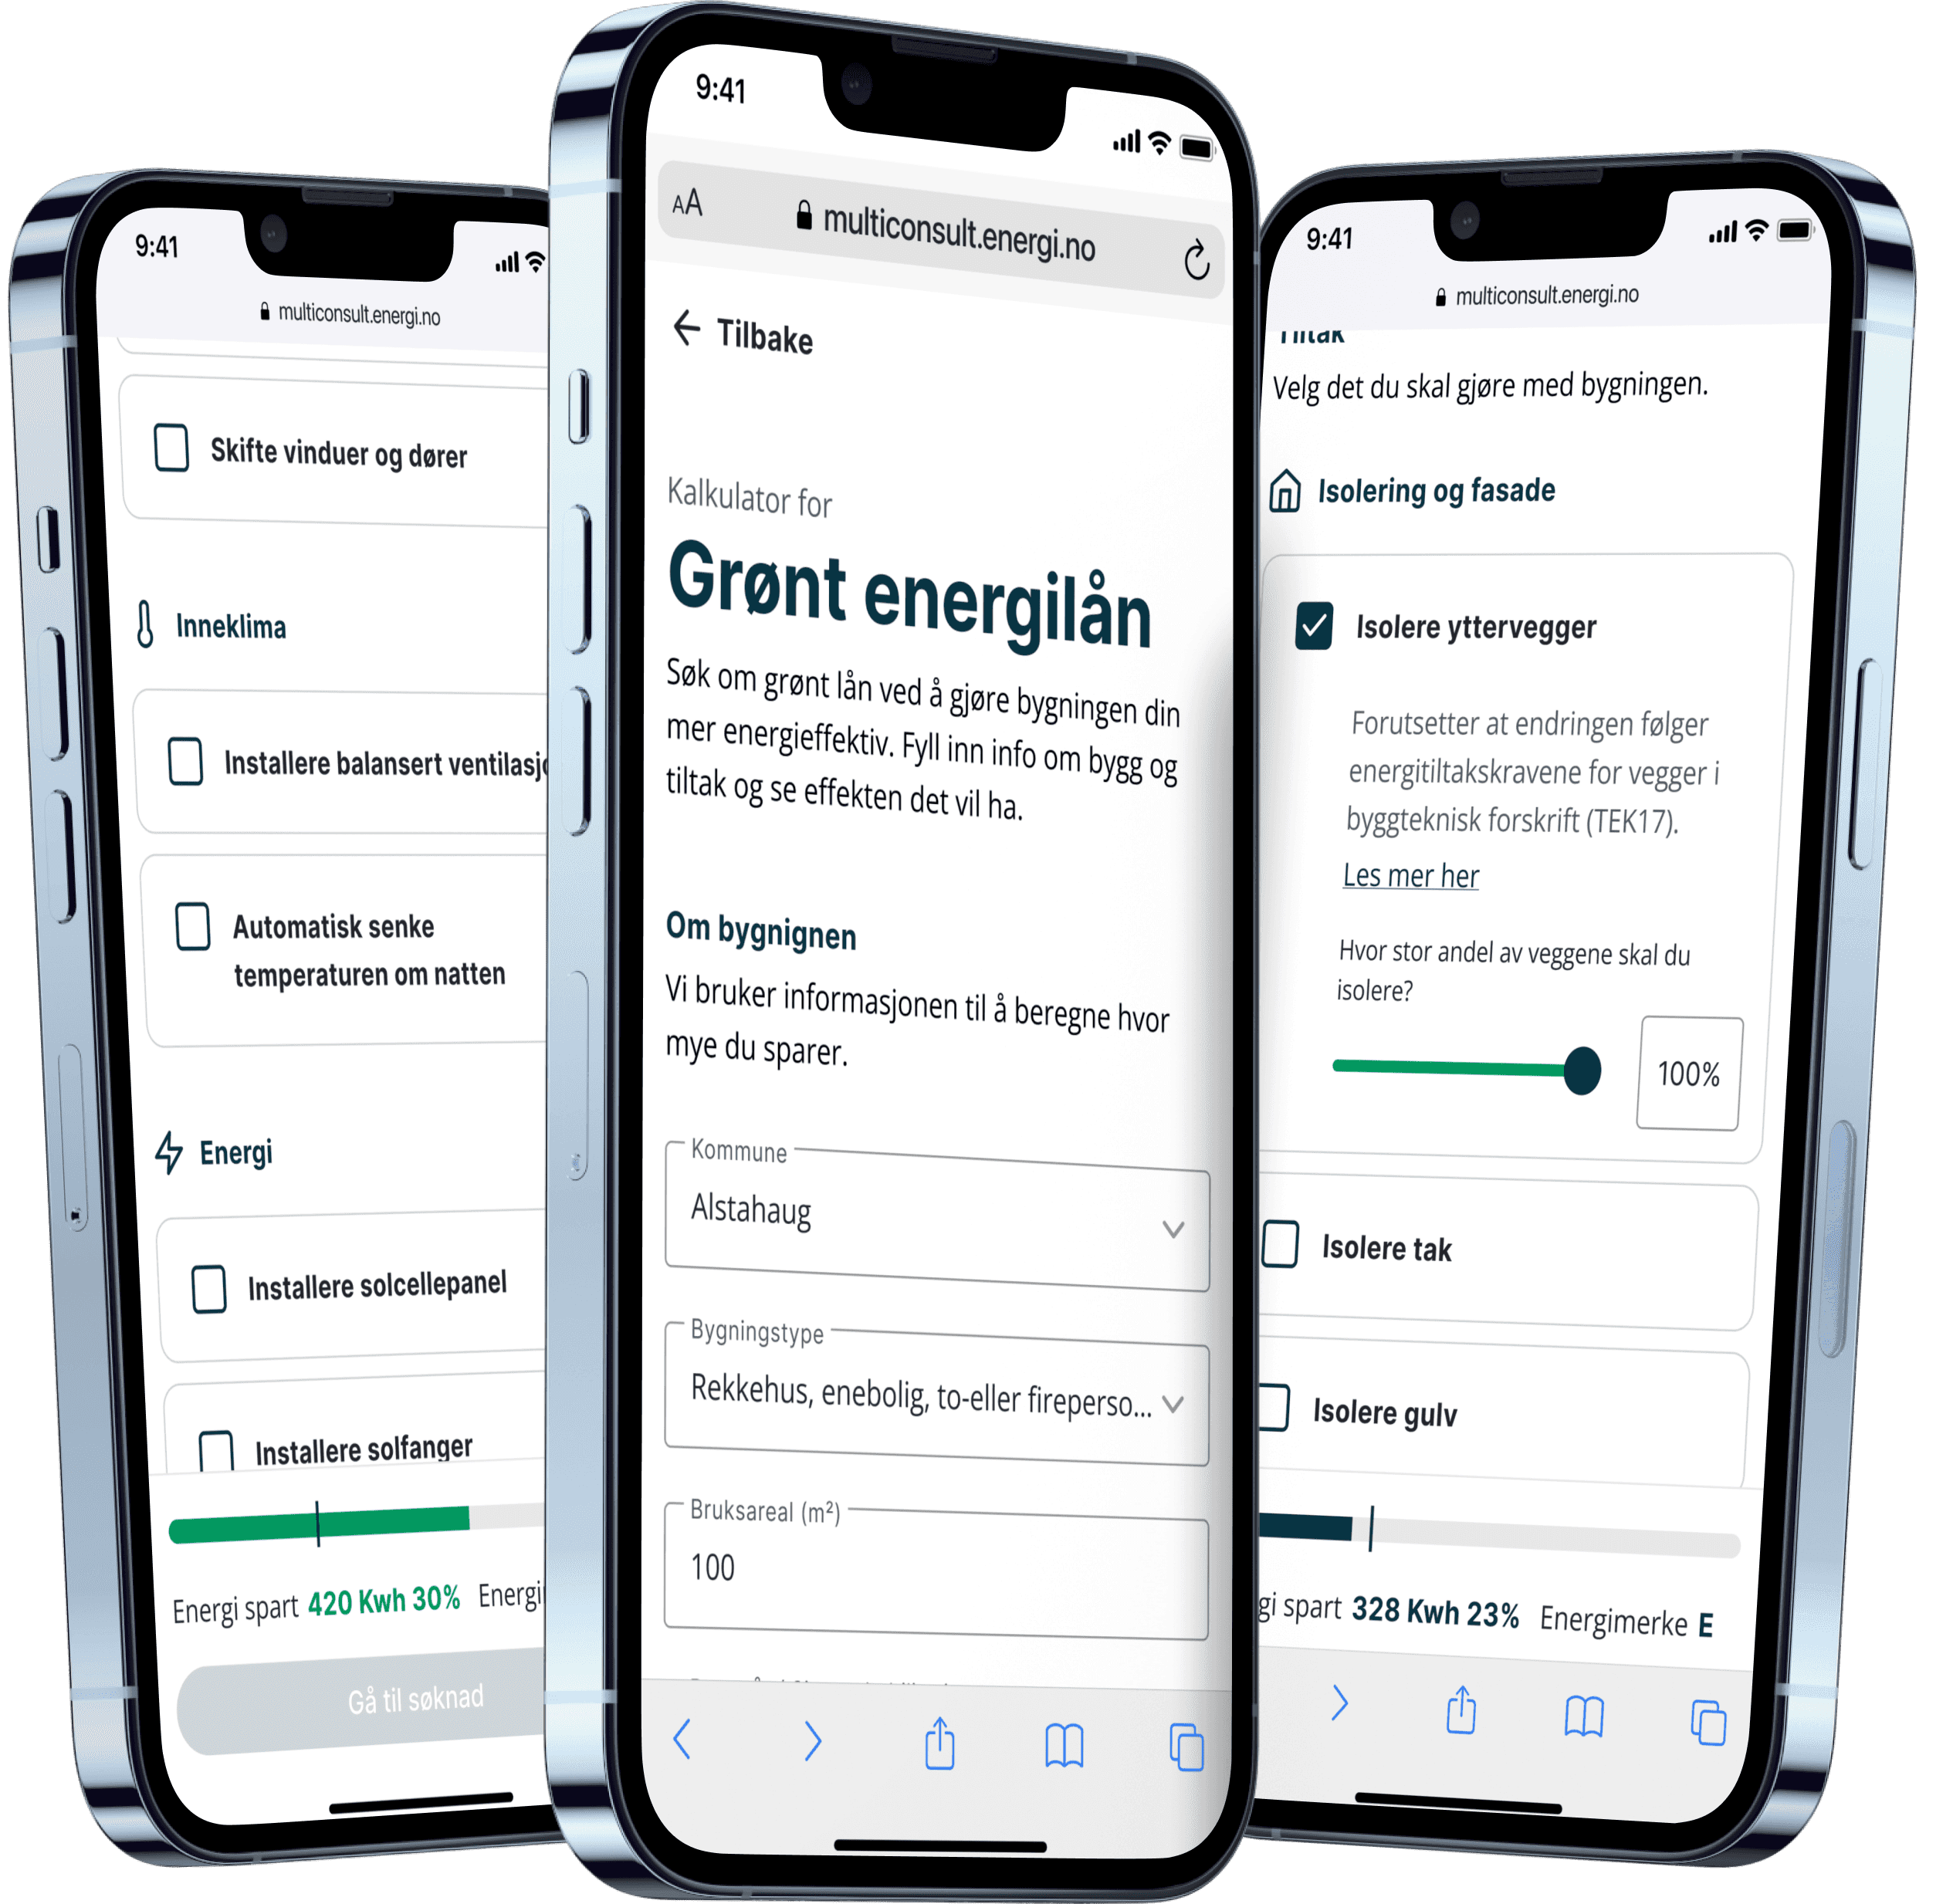 An image of three iPhone 13s with a screen showing the UI for the green energy calculator. White background, with checkboxes and a progress bar displaying the calculations visually.